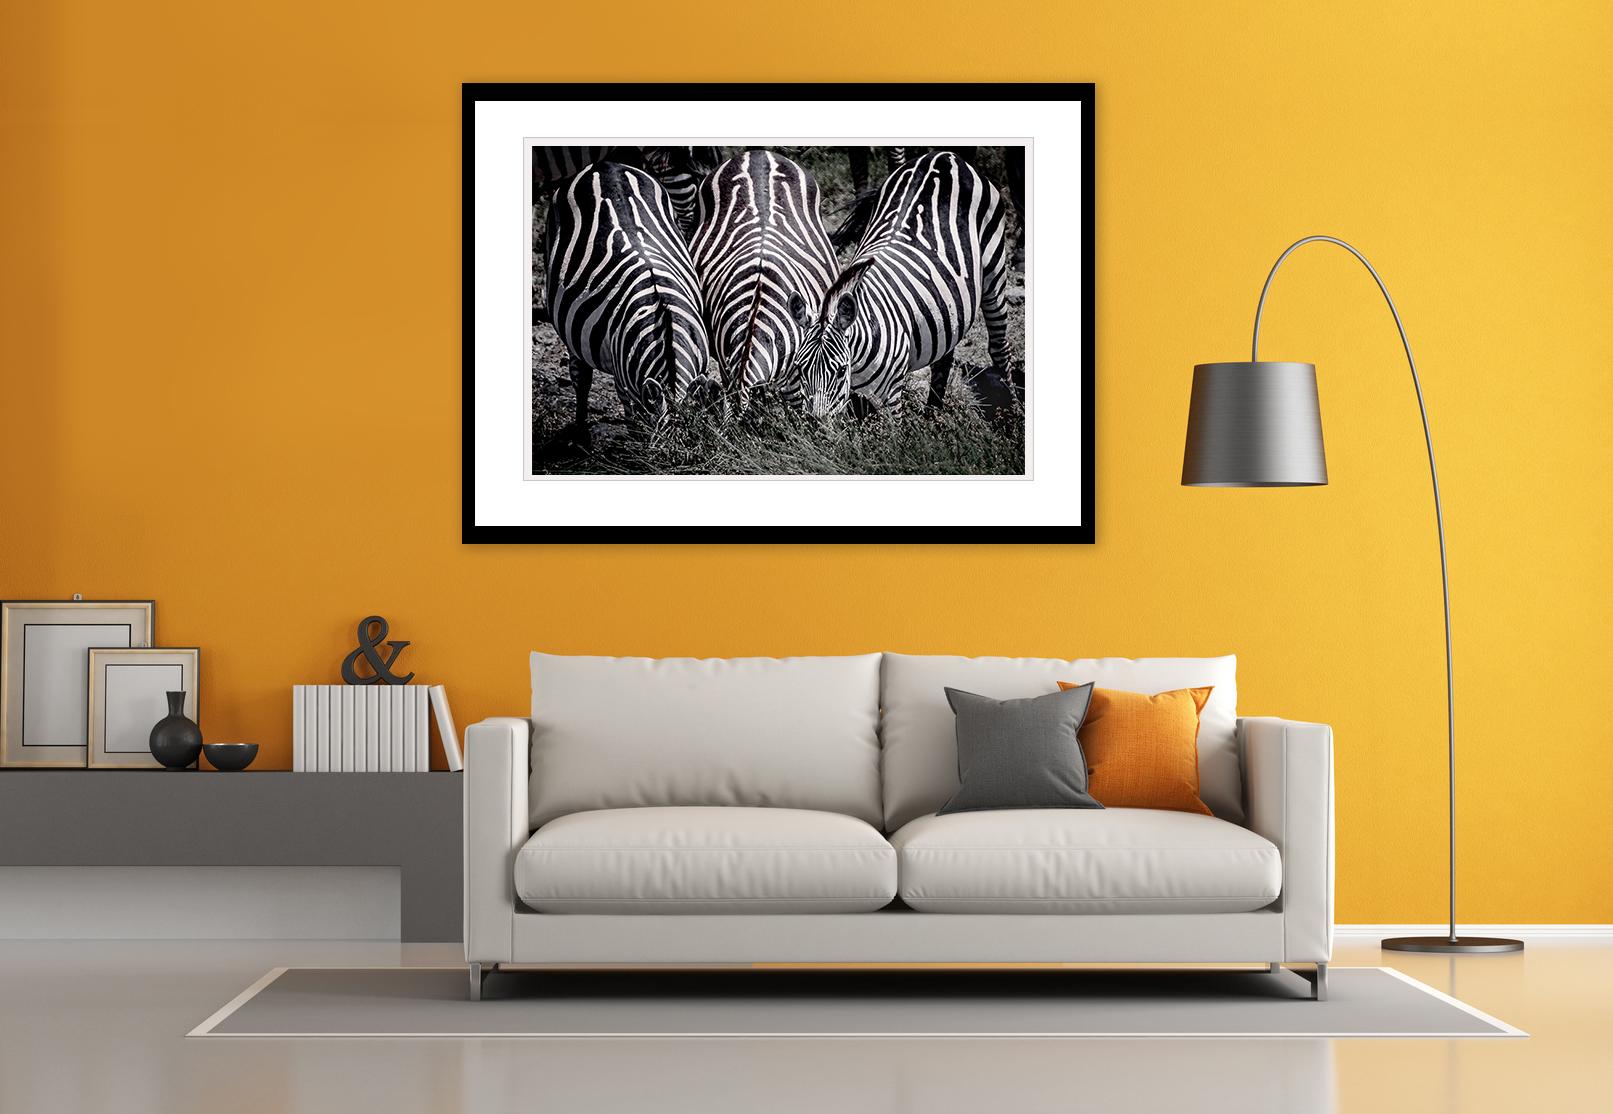  The 3 Stripe-eteers (Limited Edition of 10) - Animal Photography - Black Color Photograph by Viet Chu